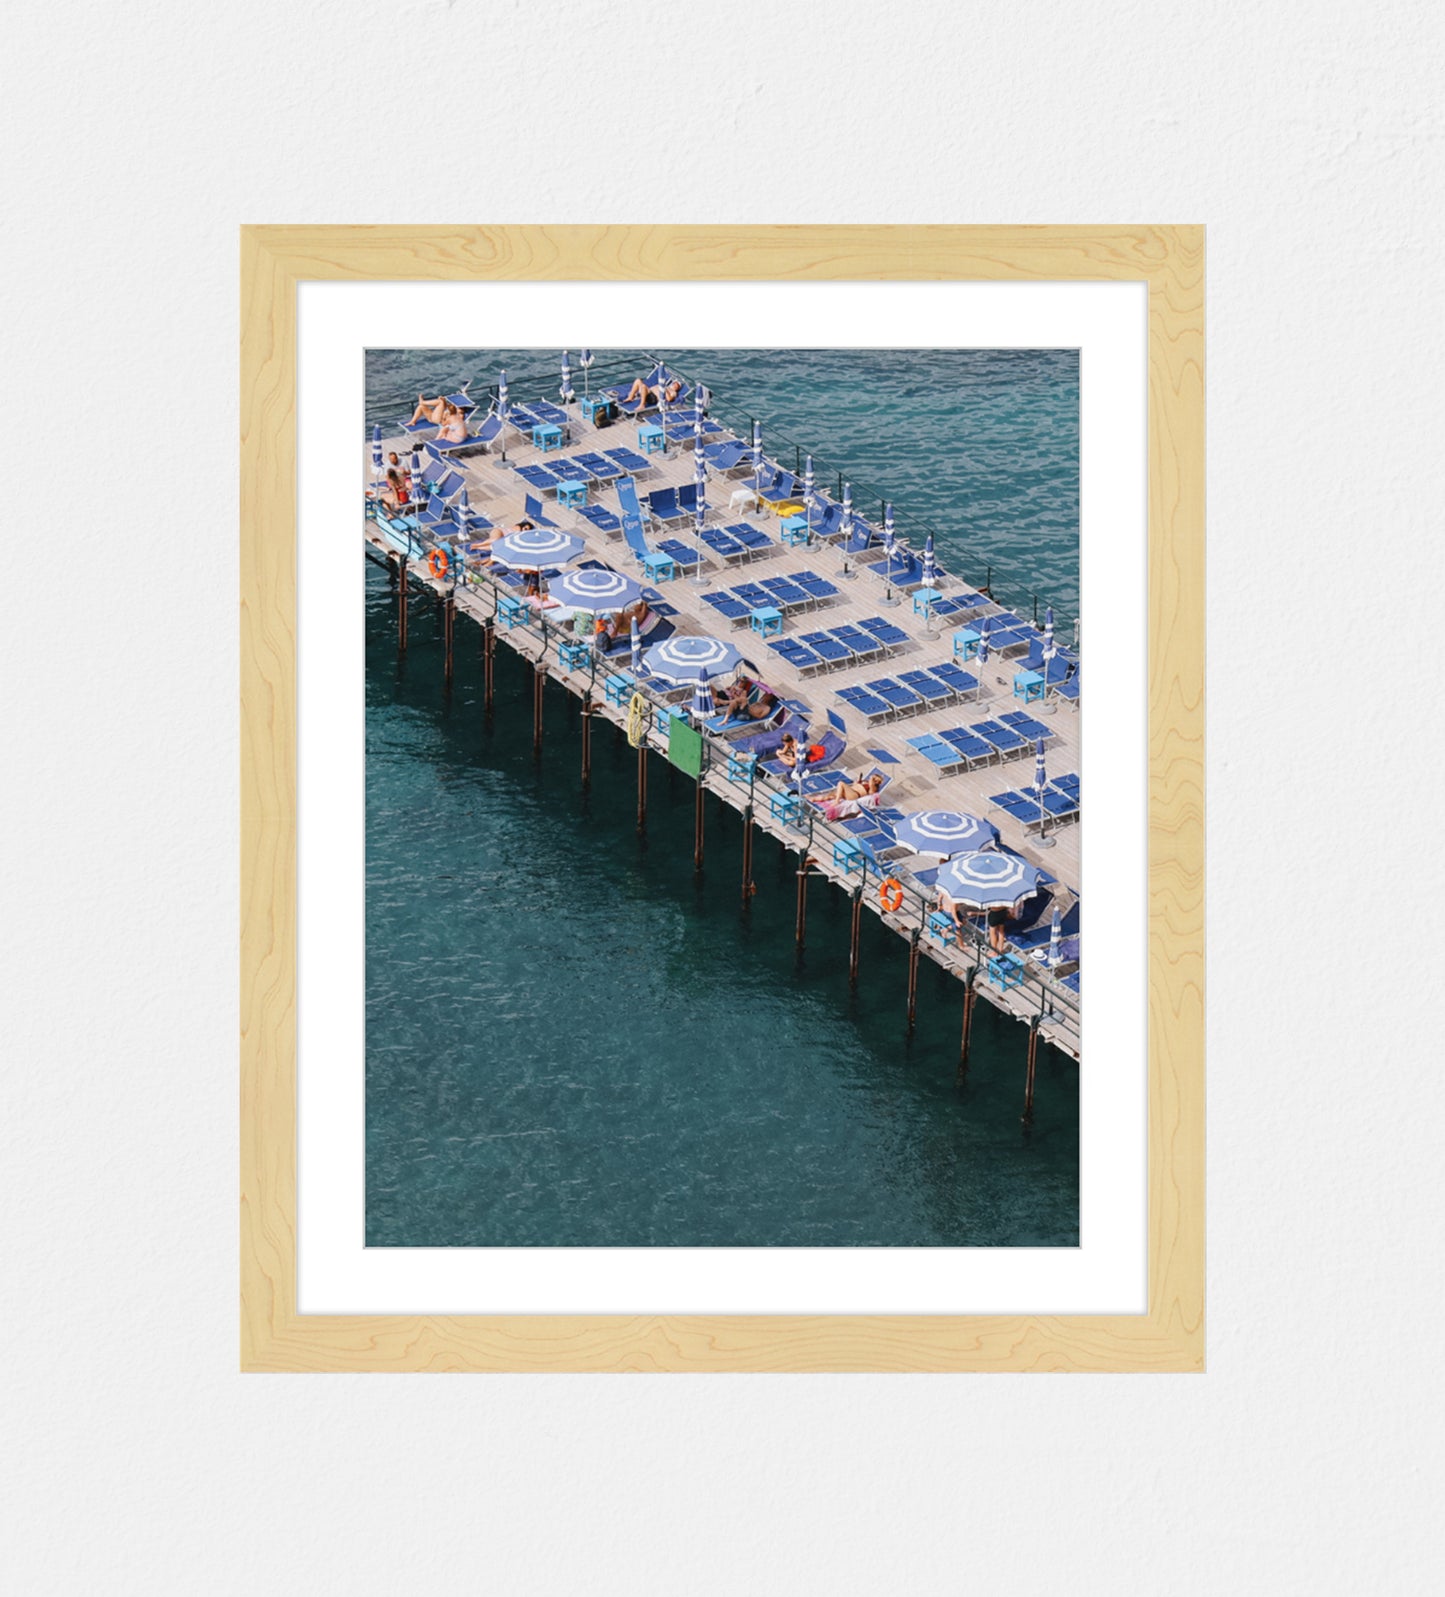 Photo of a pier at an angled shot in Sorrento, Italy. Featuring blue sunbeds and blue and white umbrellas.